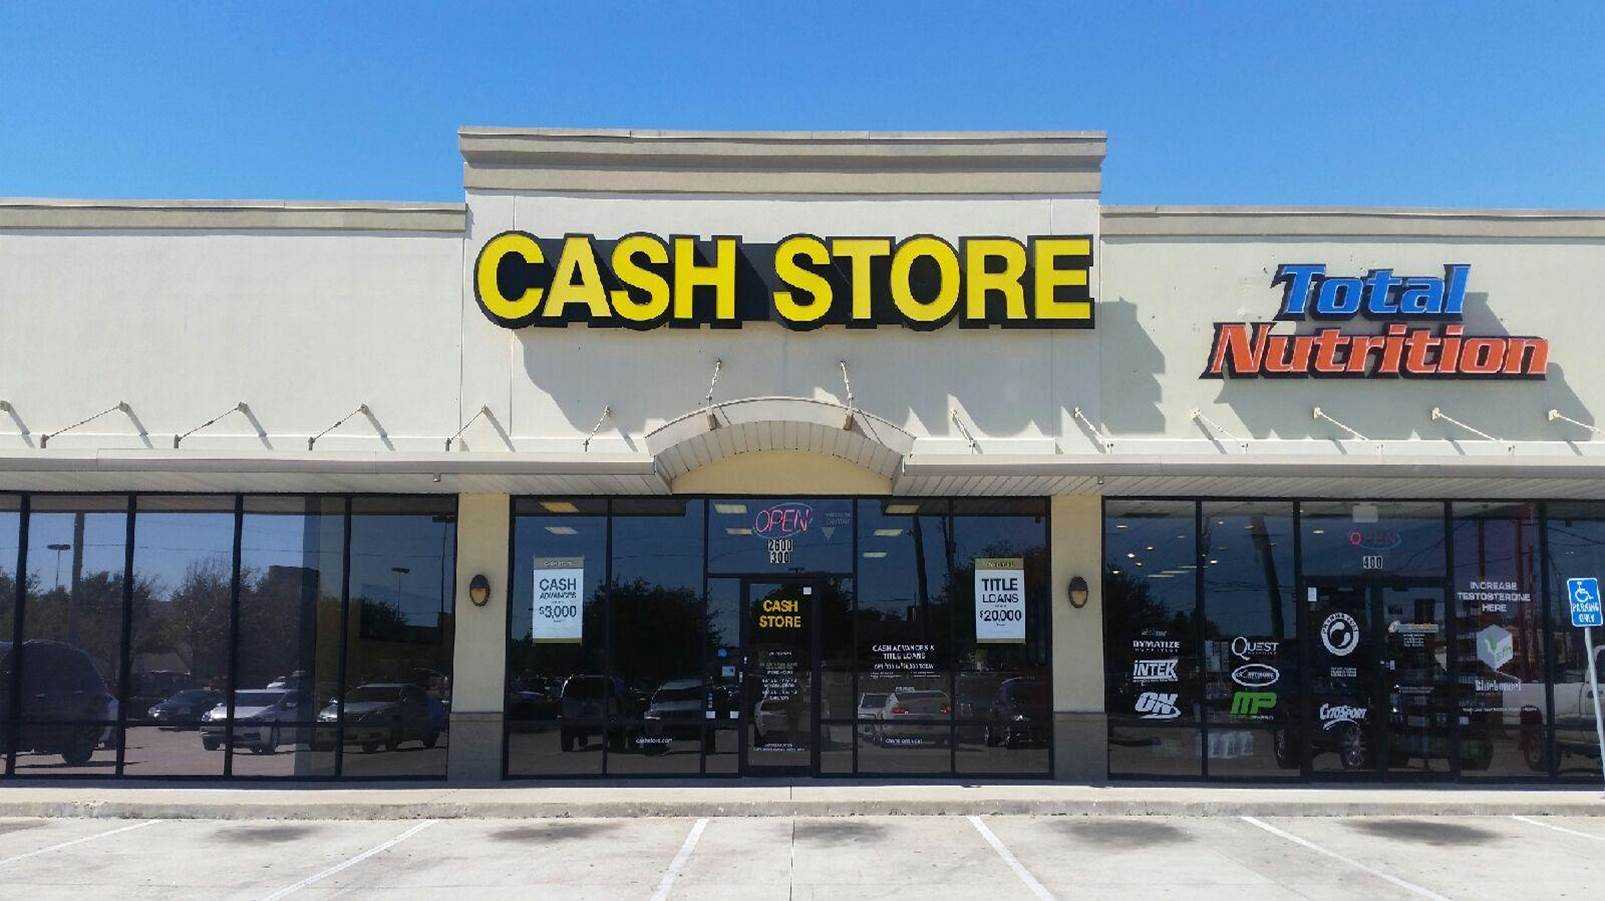 The Cash Store -  #7131